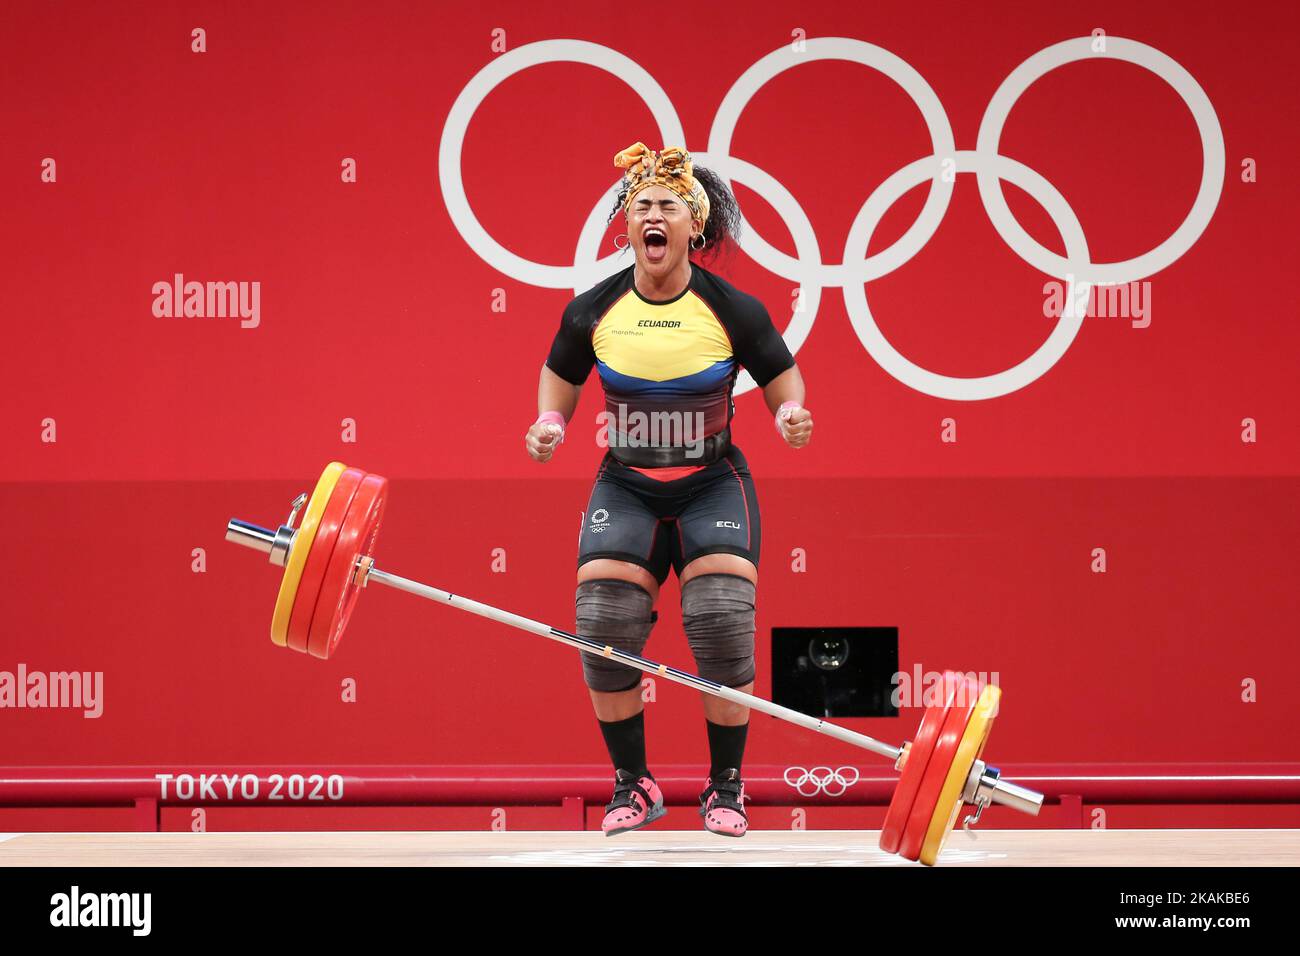 AUGUST 02, 2021 - TOKYO, JAPAN: Tamara SALAZAR of Ecuador reacts to winning the silver medal in the Weightlifting Women's 87kg at the Tokyo 2020 Olympic Games (Photo by Mickael Chavet/RX) Stock Photo